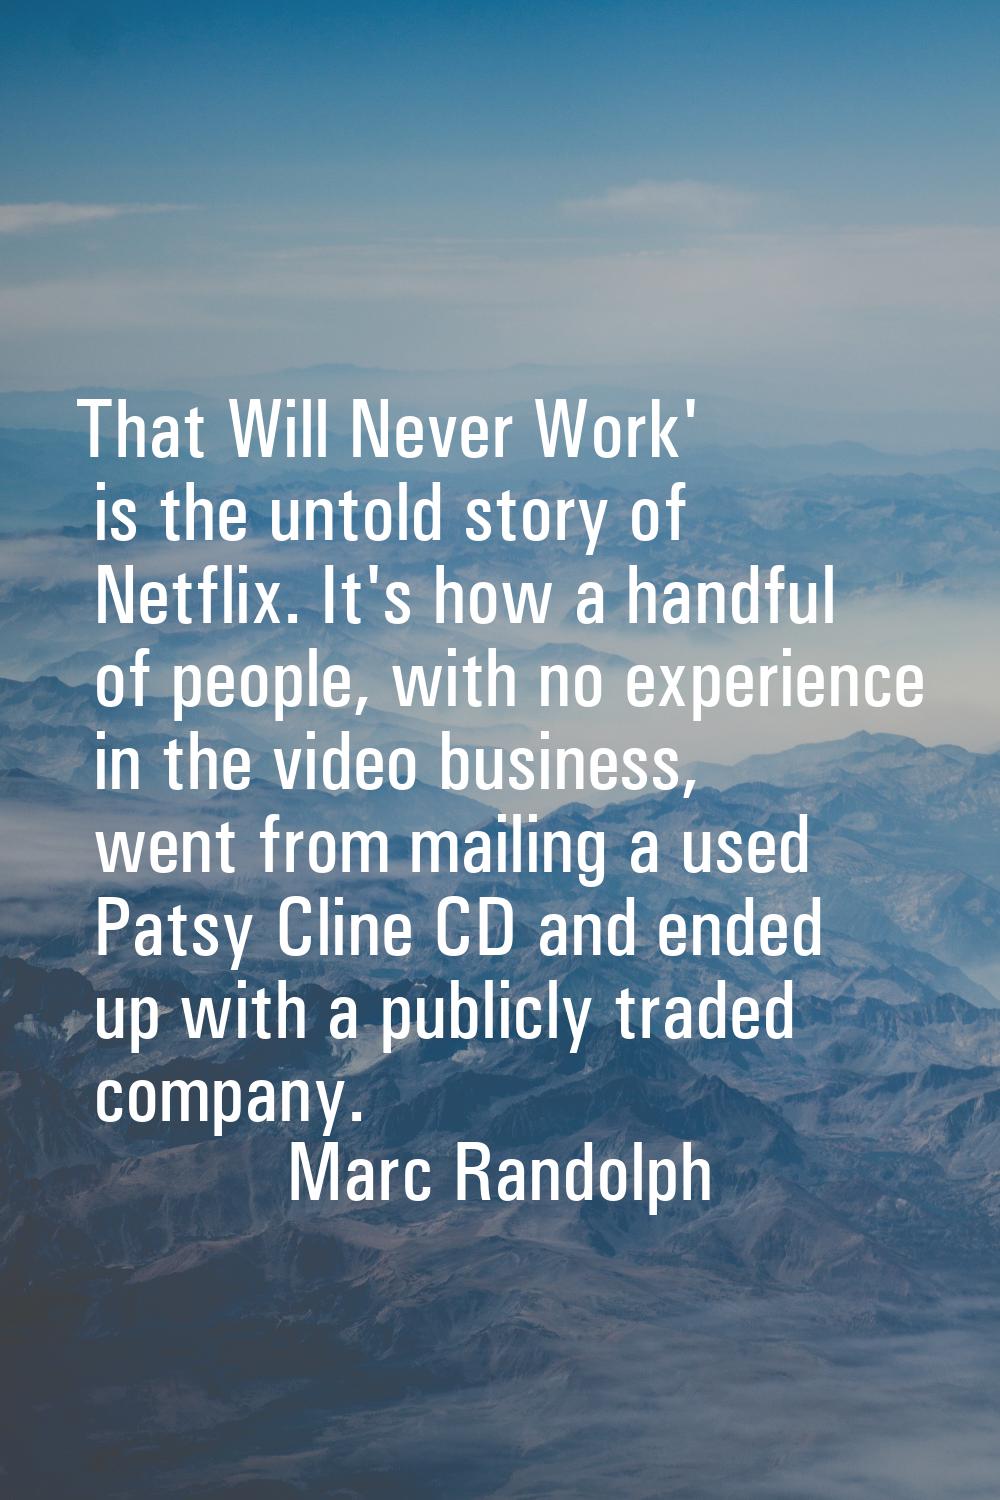 That Will Never Work' is the untold story of Netflix. It's how a handful of people, with no experie